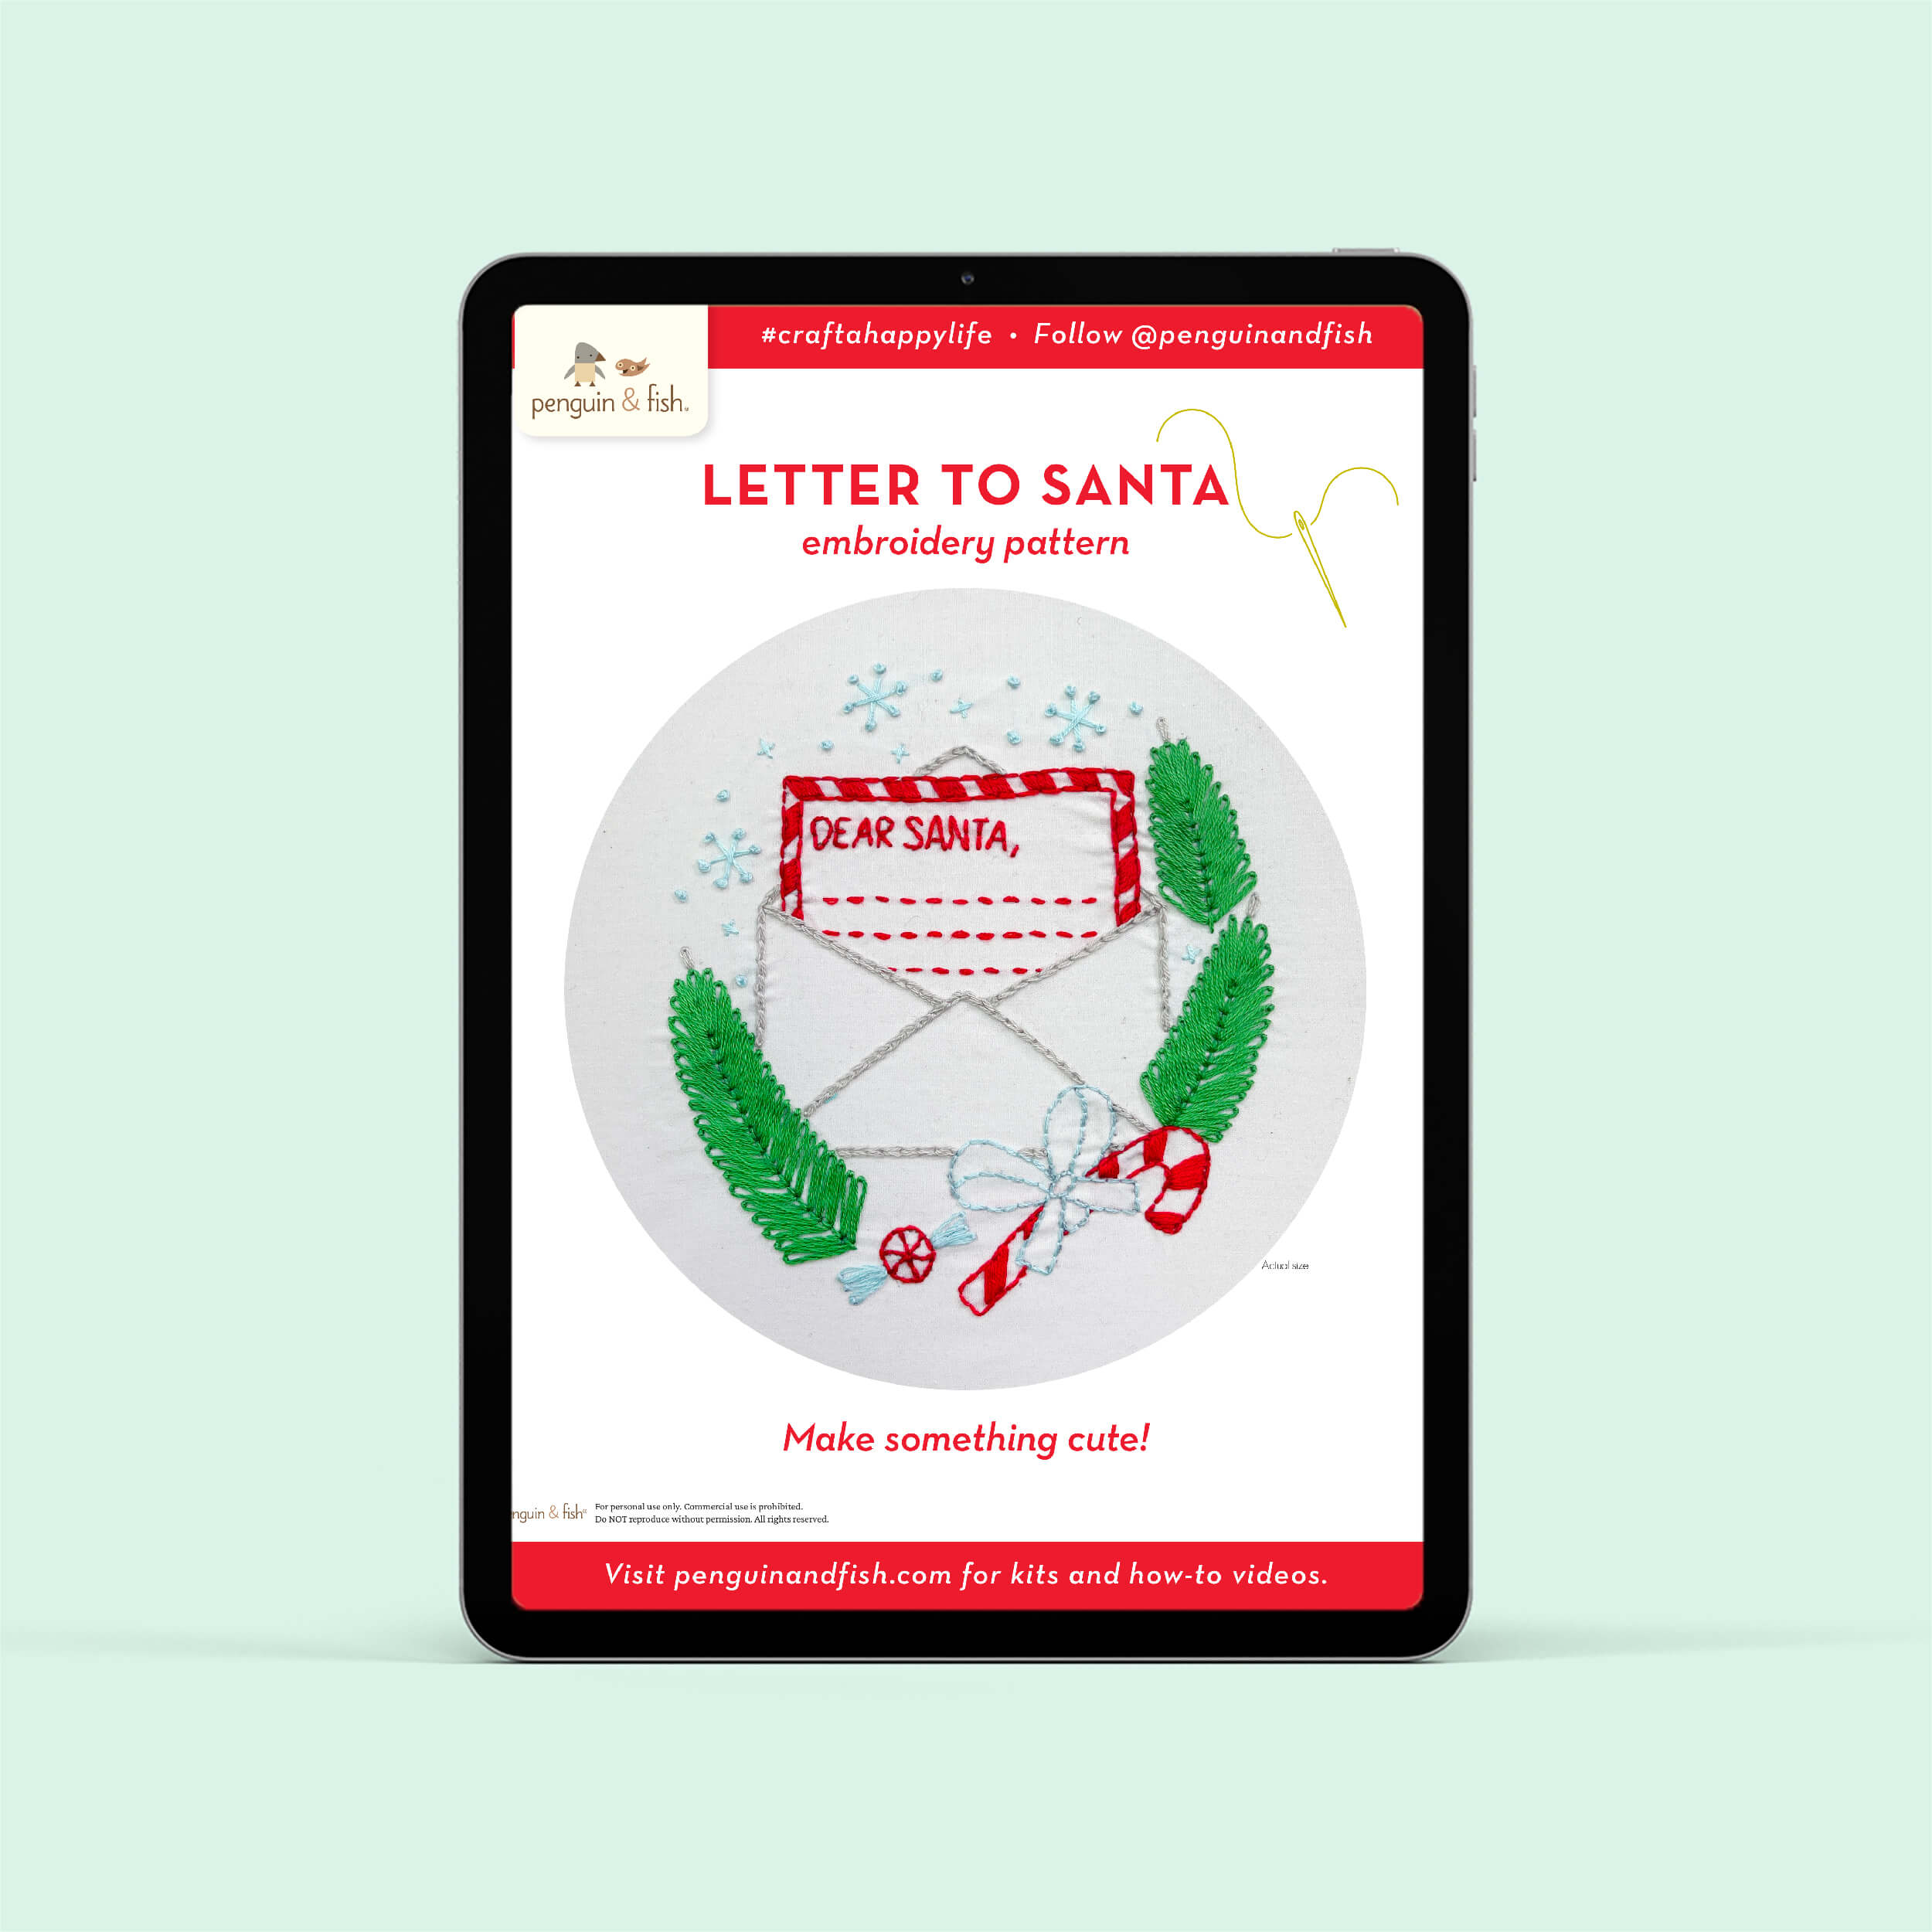 Letter to Santa PDF embroidery pattern shown on a tablet